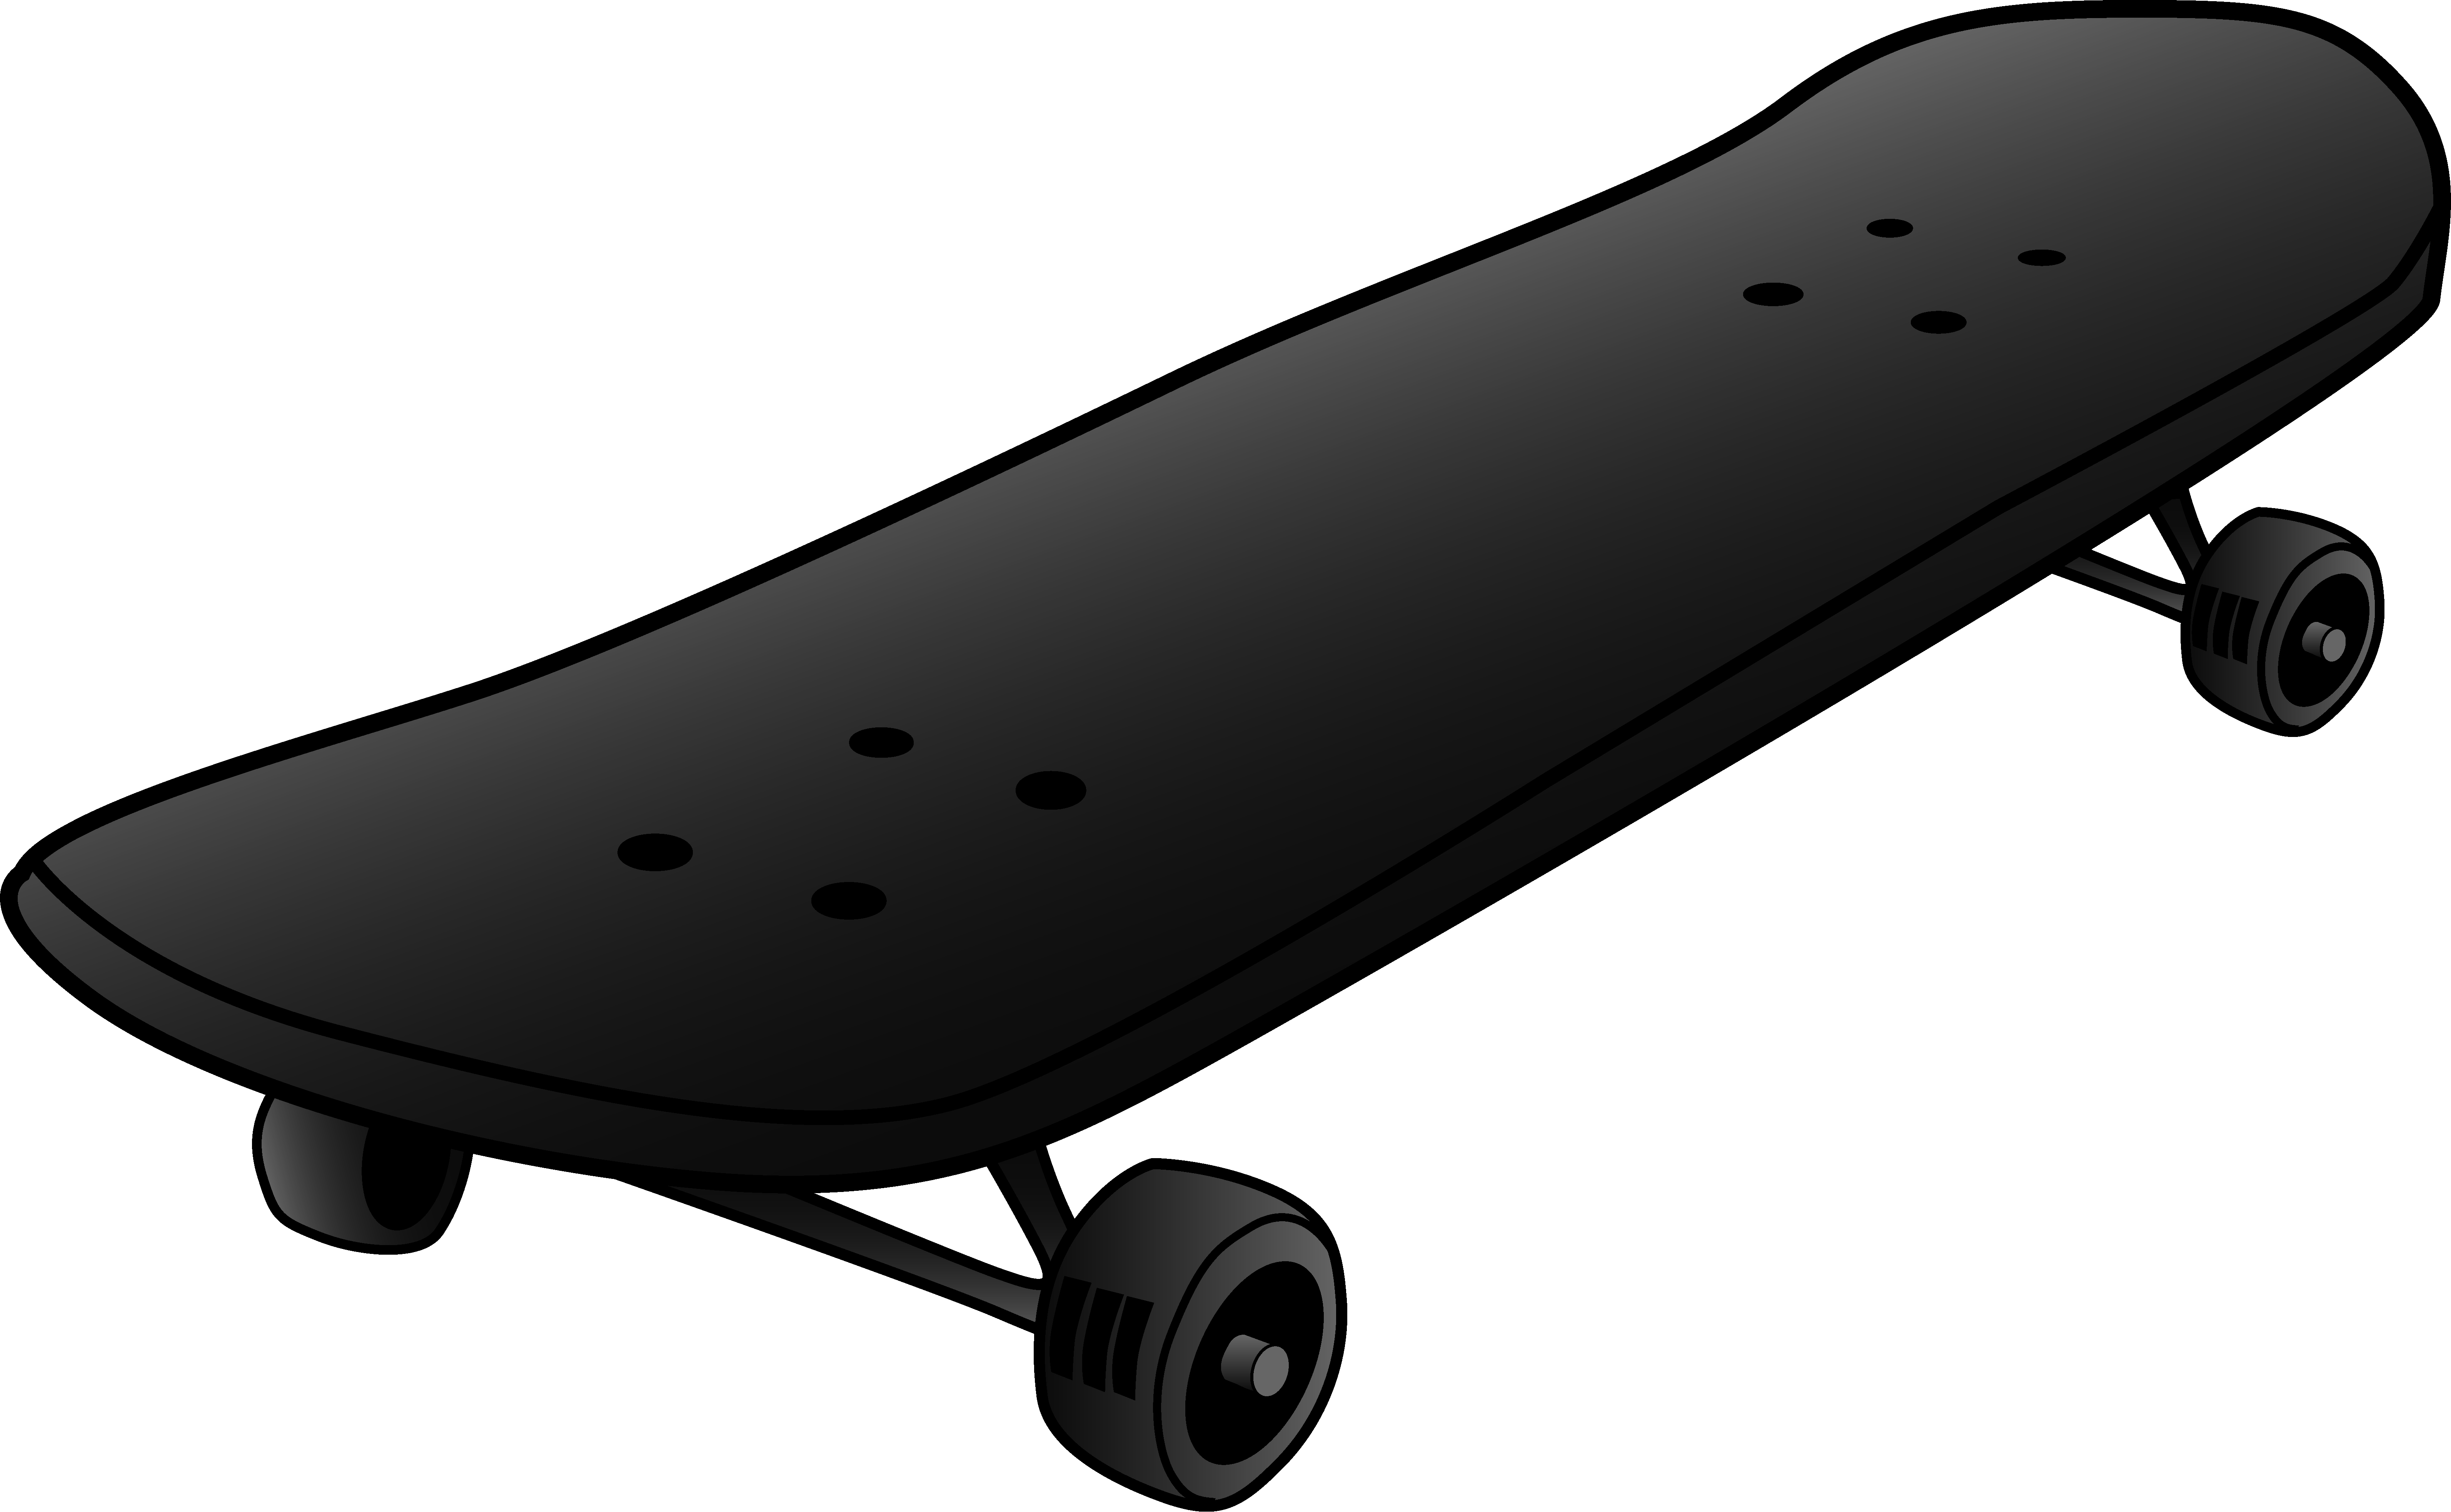 Skateboard Clipart Black And White - Free Clipart ...